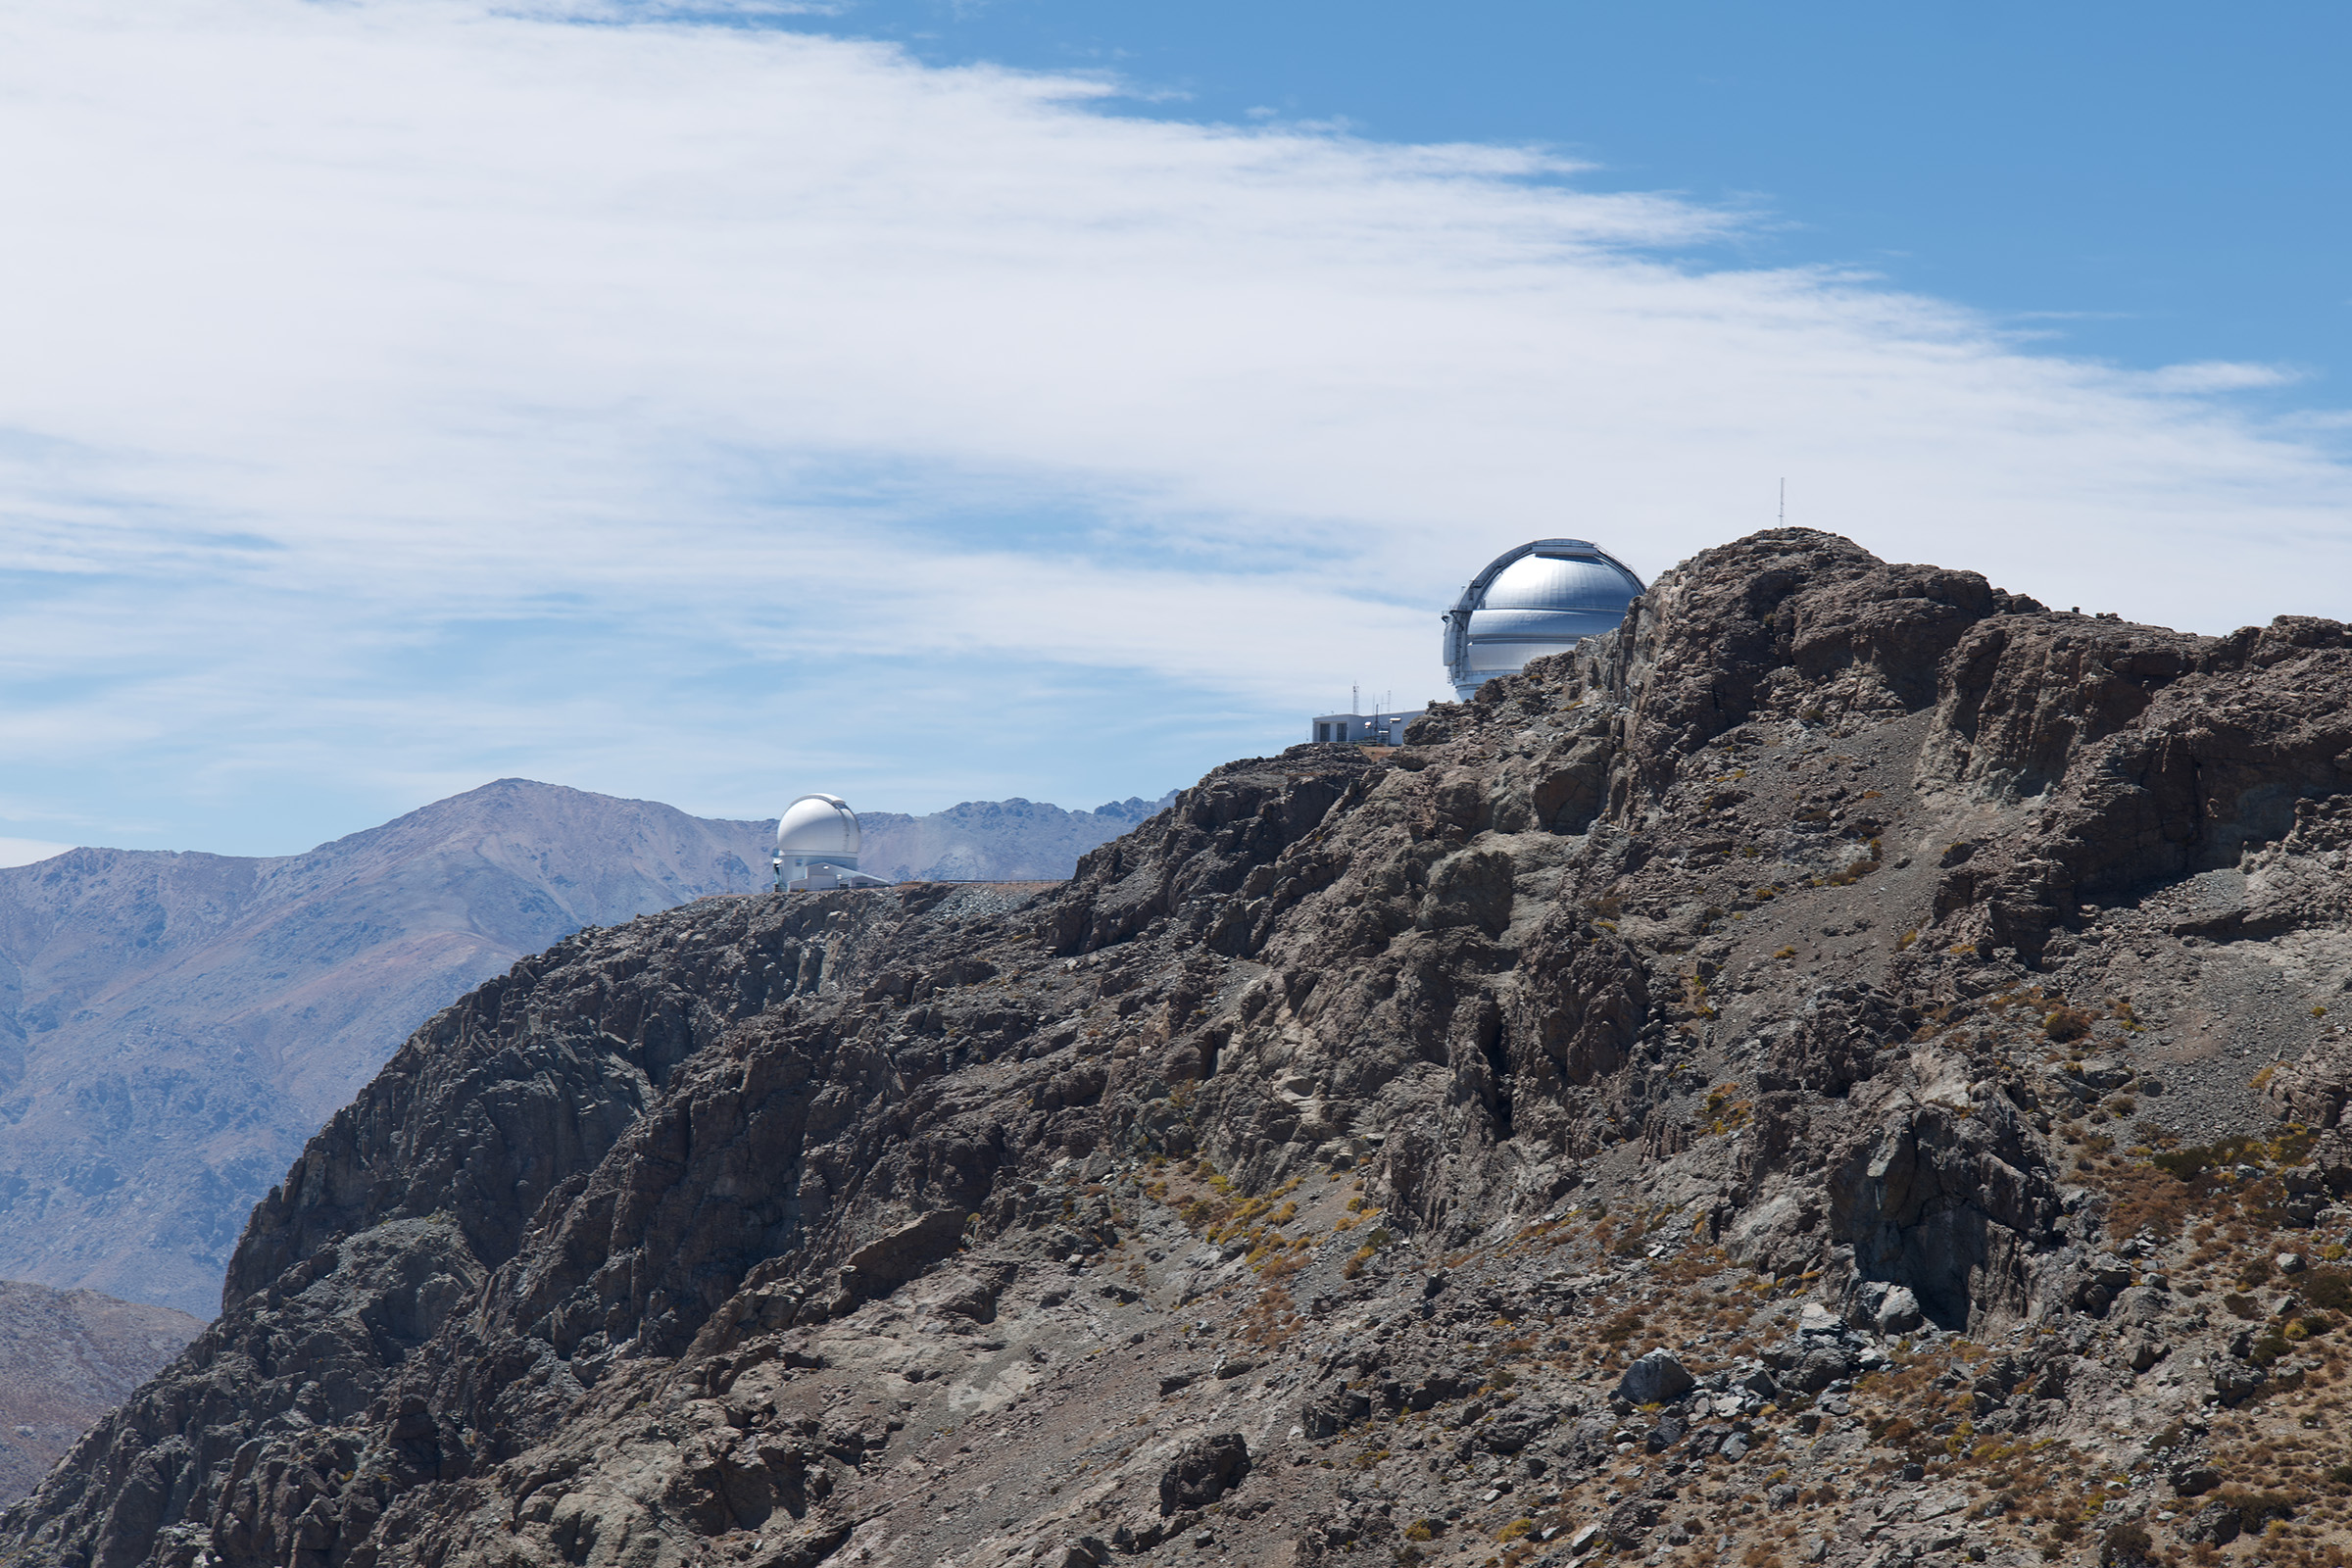 Buildings at the Cerro Tololo Inter-American Observatory peer over a rocky outcropping.